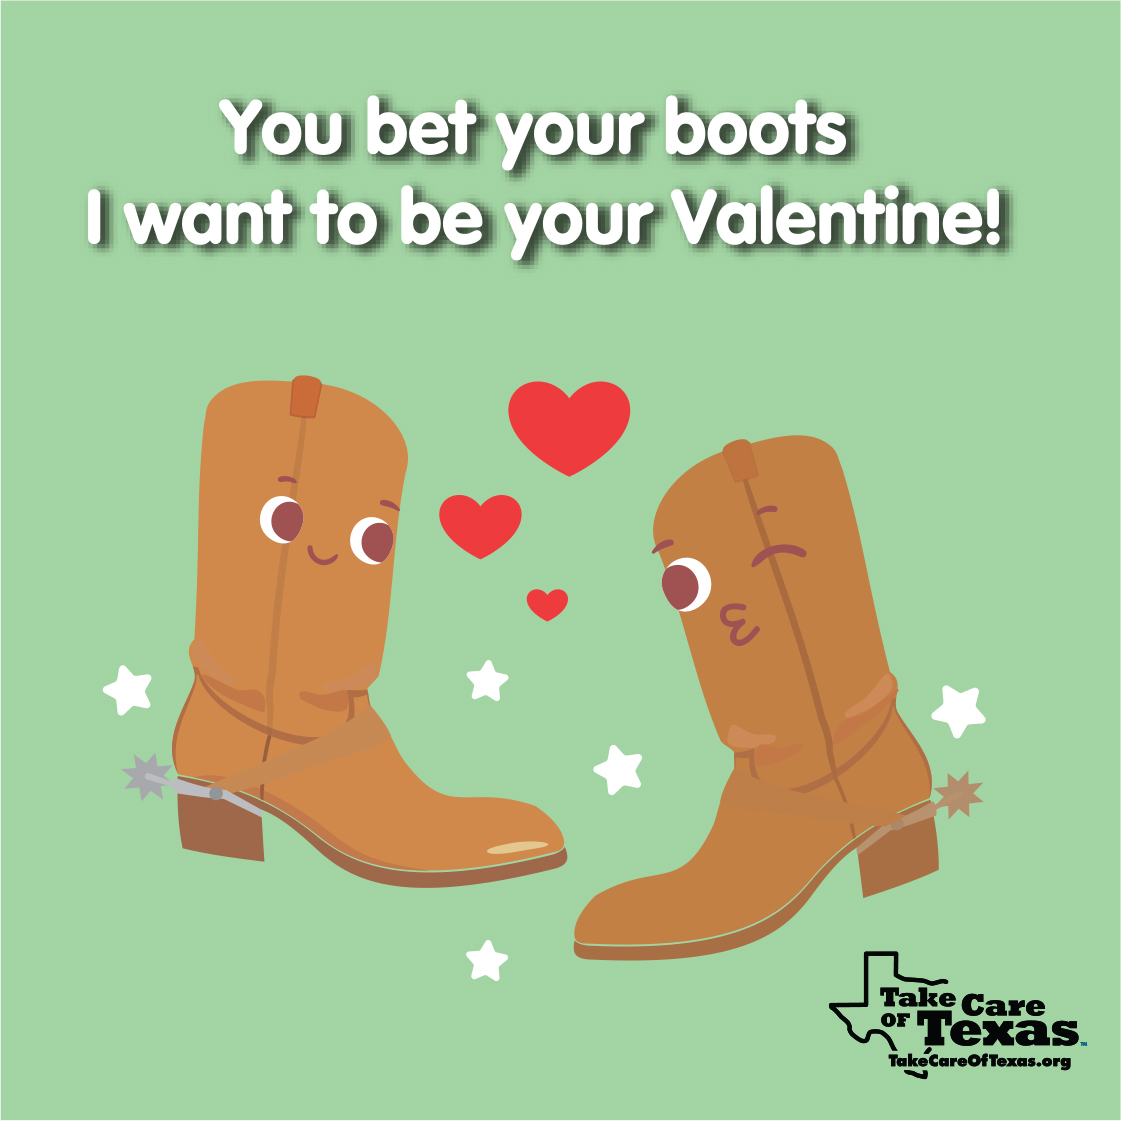 Cowboy boots with the text "You bet your boots I want to be your Valentine!"